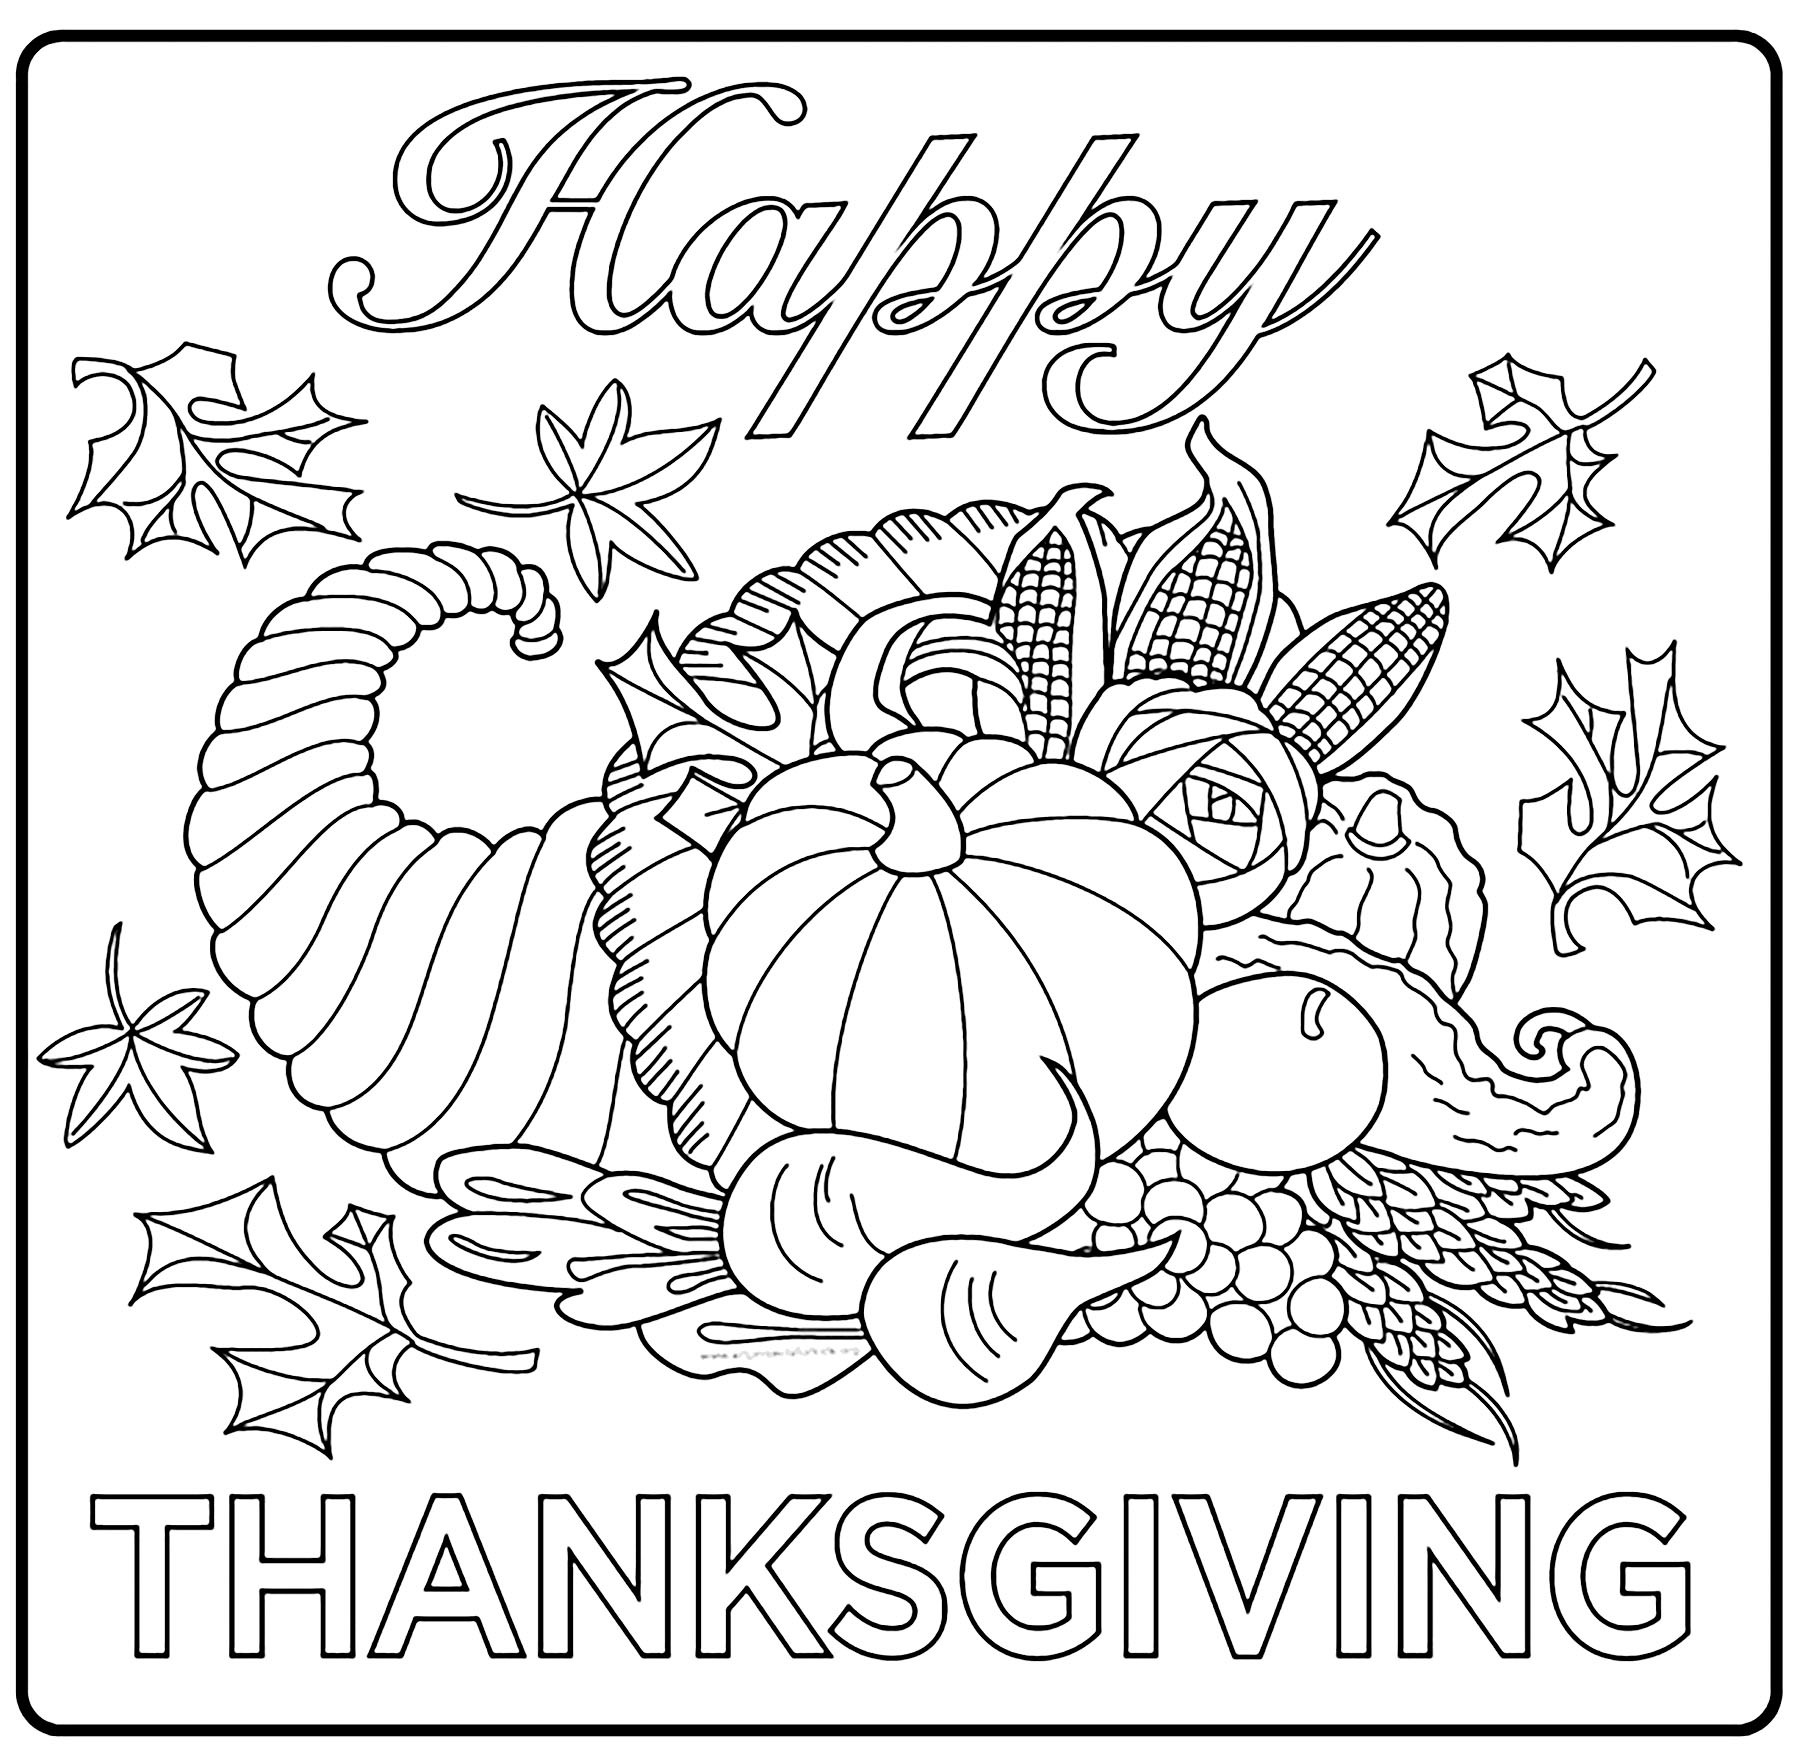 Thanksgiving Coloring Pages For Kids
 Thanksgiving free to color for children Thanksgiving